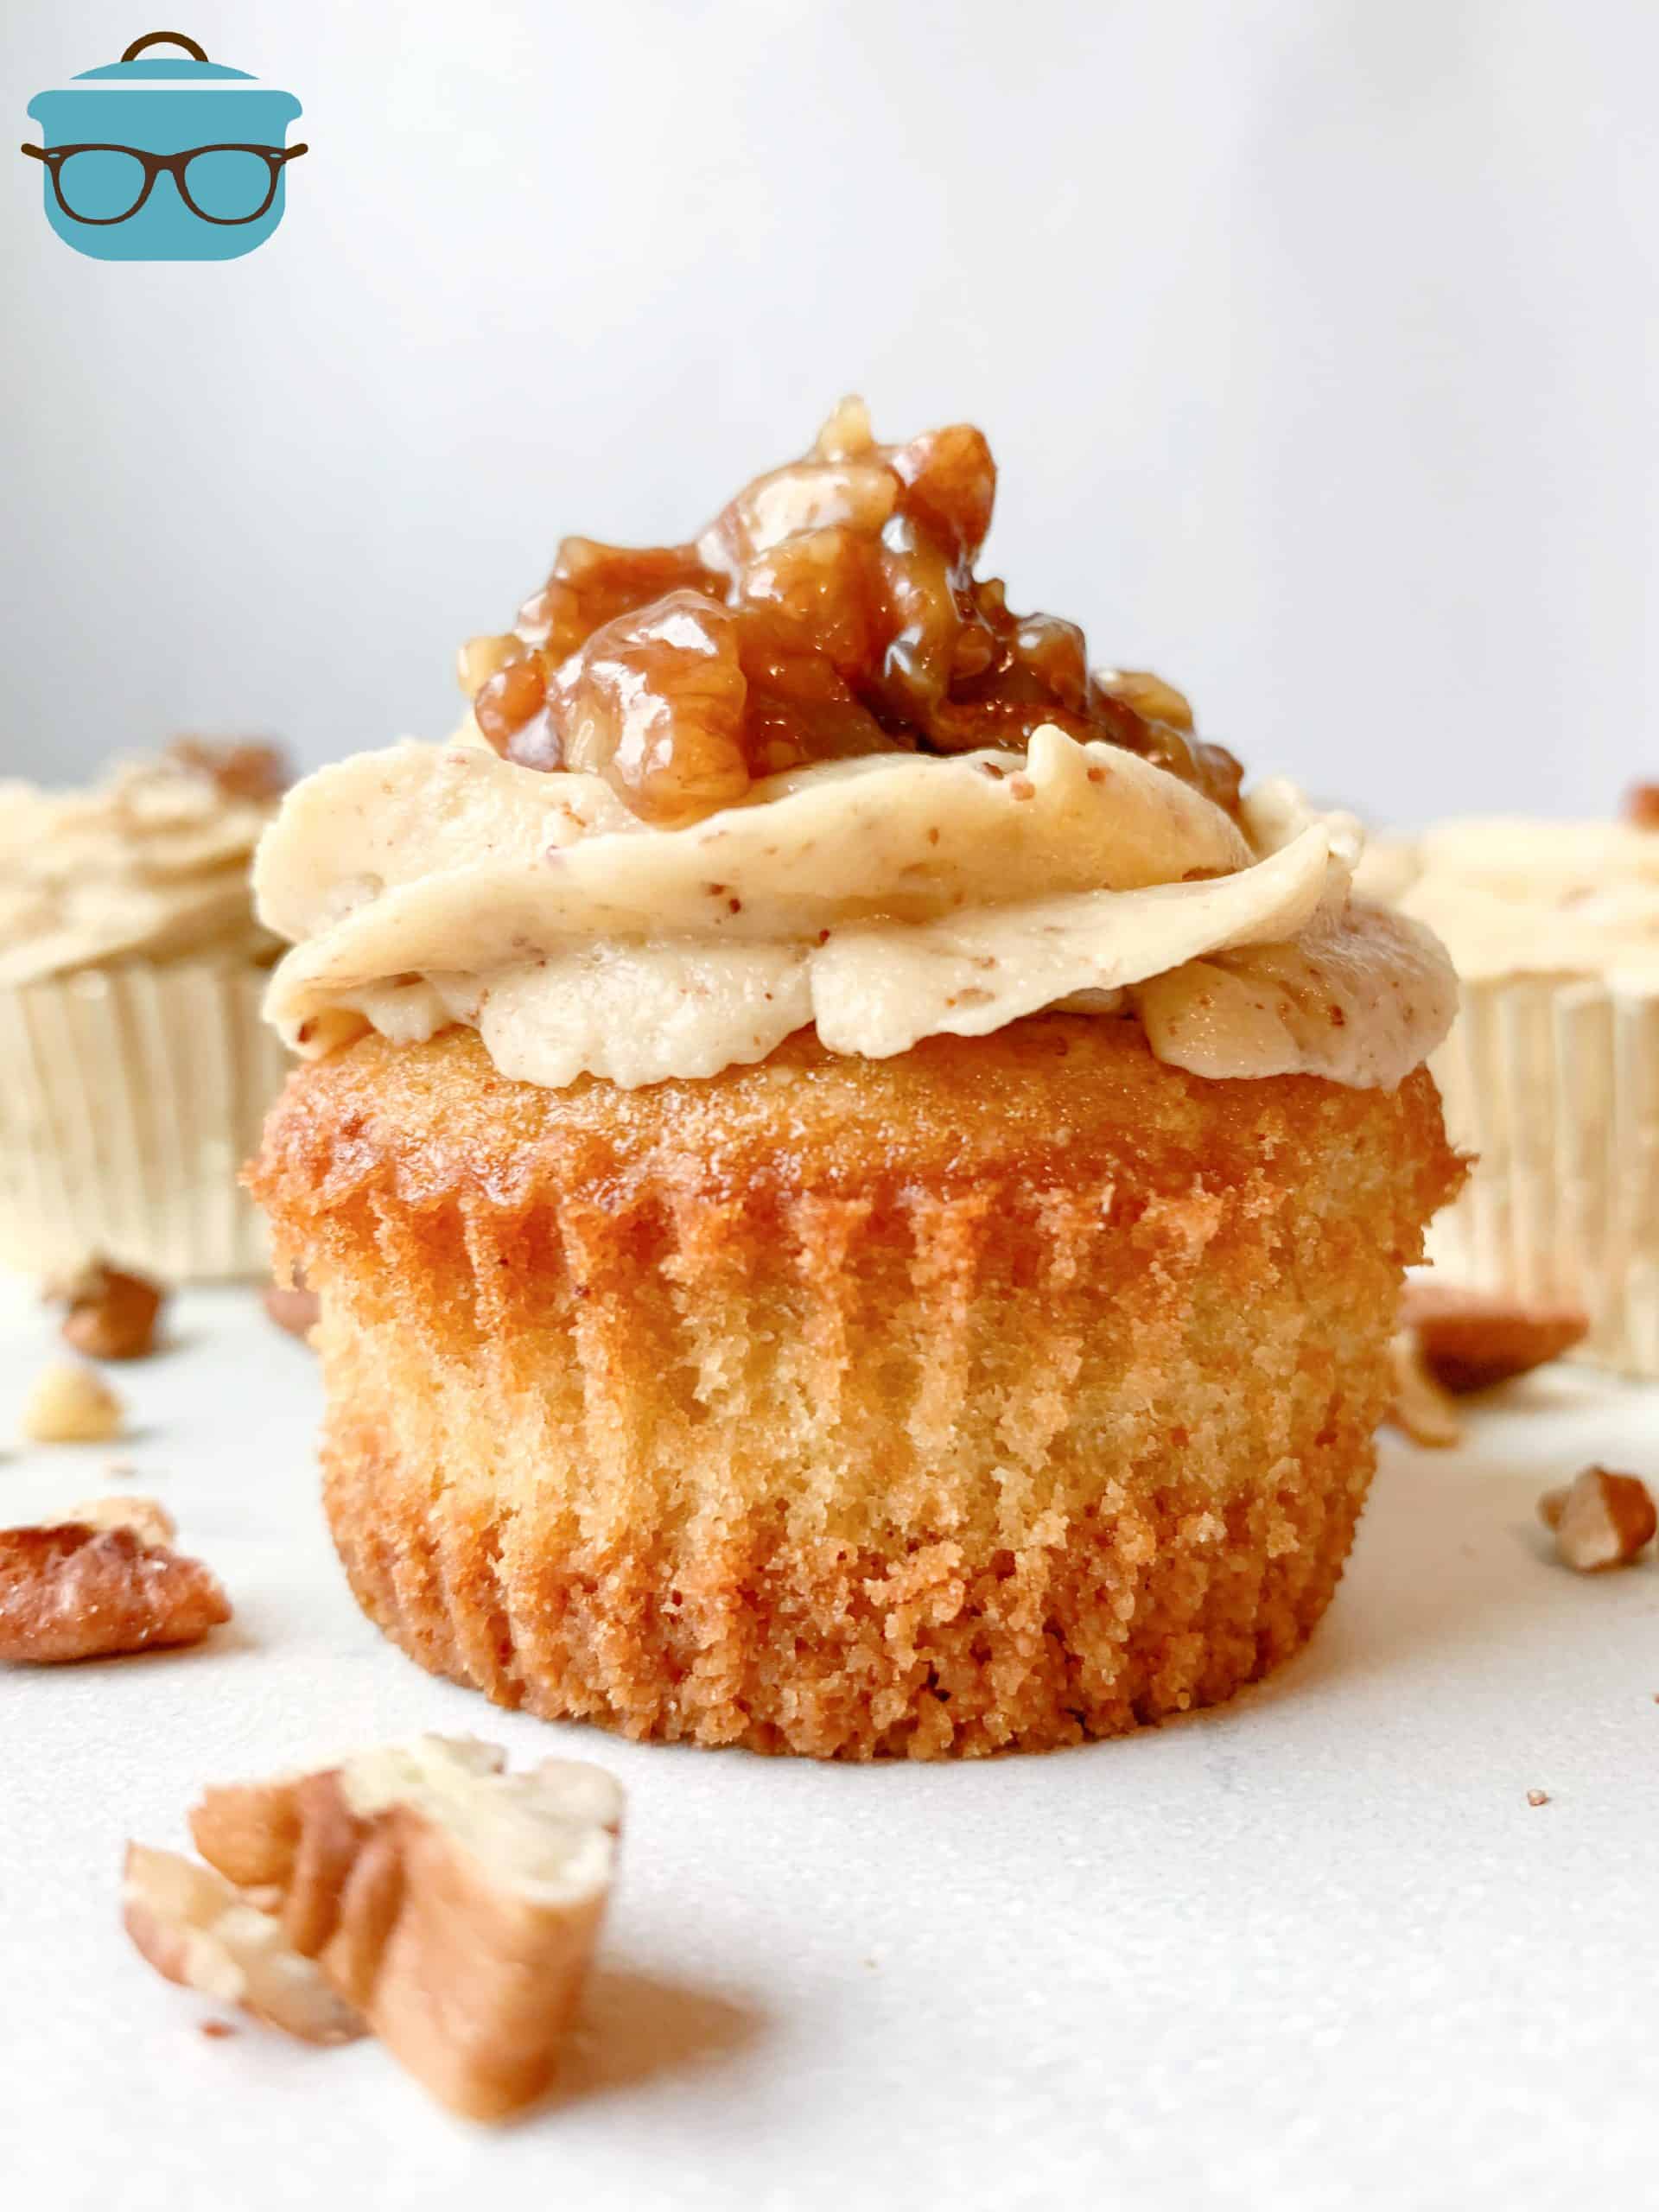 single pecan pie cupcake shown without a cupcake liner, chopped pecans sprinkled around the cupcake.